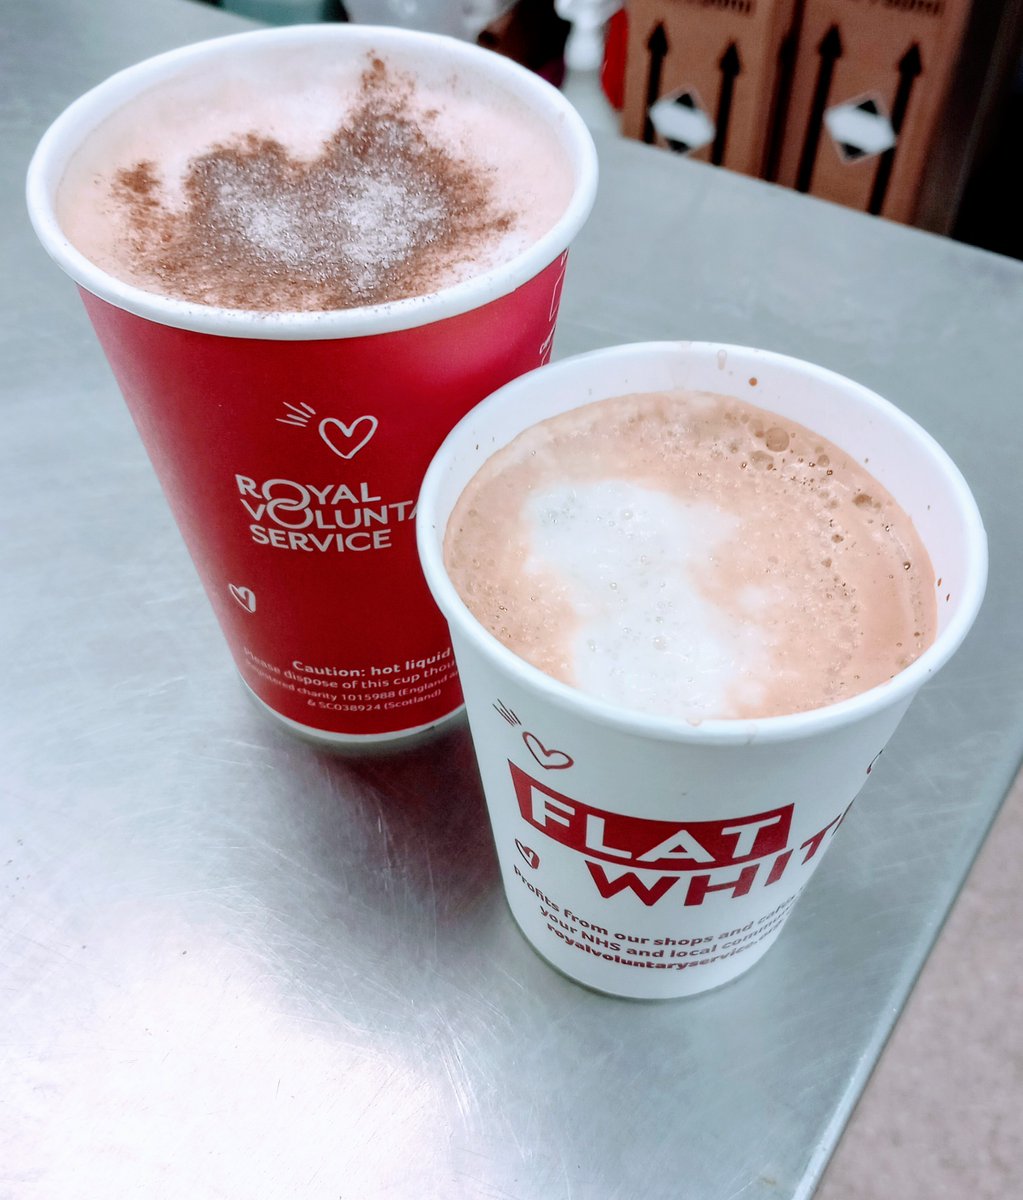 At our café get £1 off any hot drink with any purchase* (T&Cs apply - £1 off is for subsequent purchase & valid for 5 days). The café is run by RVS & is open 6 days a week: - Mondays - Wednesdays: 9:30am-4pm - Thursdays: 10am-4:30pm - Fridays: 9:30am-1pm - Saturdays: 9:30am-12pm